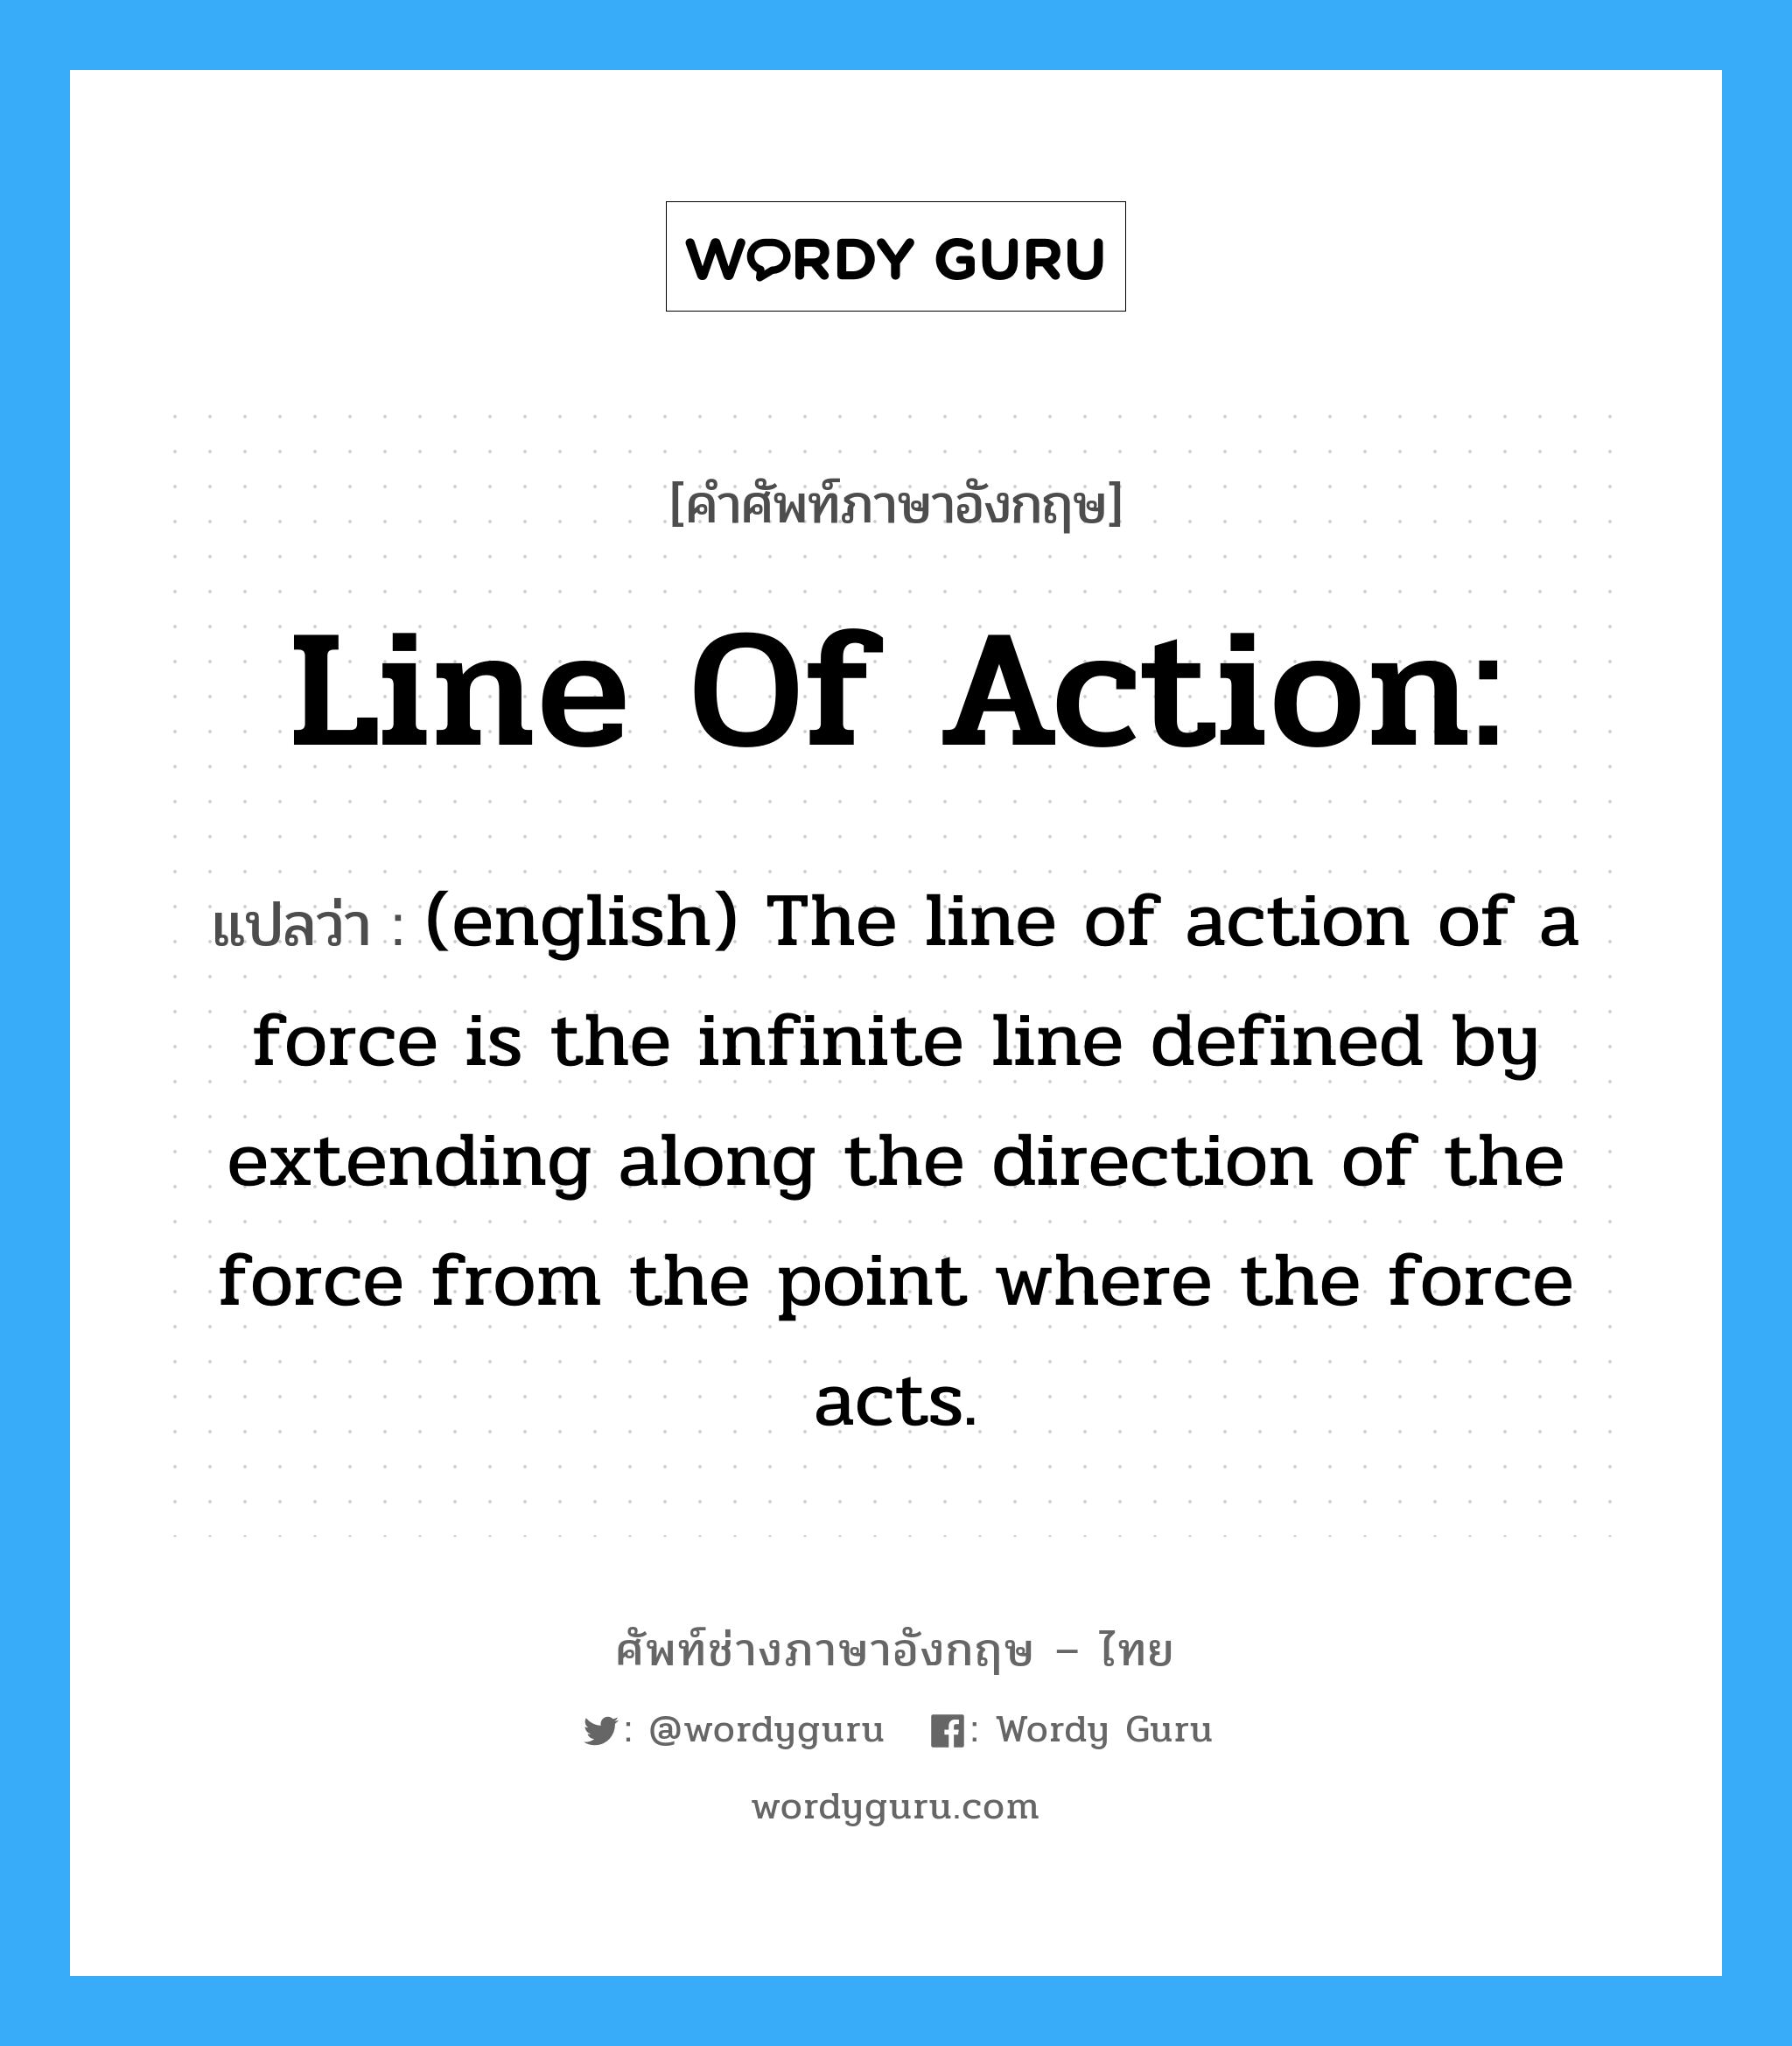 (english) The line of action of a force is the infinite line defined by extending along the direction of the force from the point where the force acts. ภาษาอังกฤษ?, คำศัพท์ช่างภาษาอังกฤษ - ไทย (english) The line of action of a force is the infinite line defined by extending along the direction of the force from the point where the force acts. คำศัพท์ภาษาอังกฤษ (english) The line of action of a force is the infinite line defined by extending along the direction of the force from the point where the force acts. แปลว่า Line of Action: